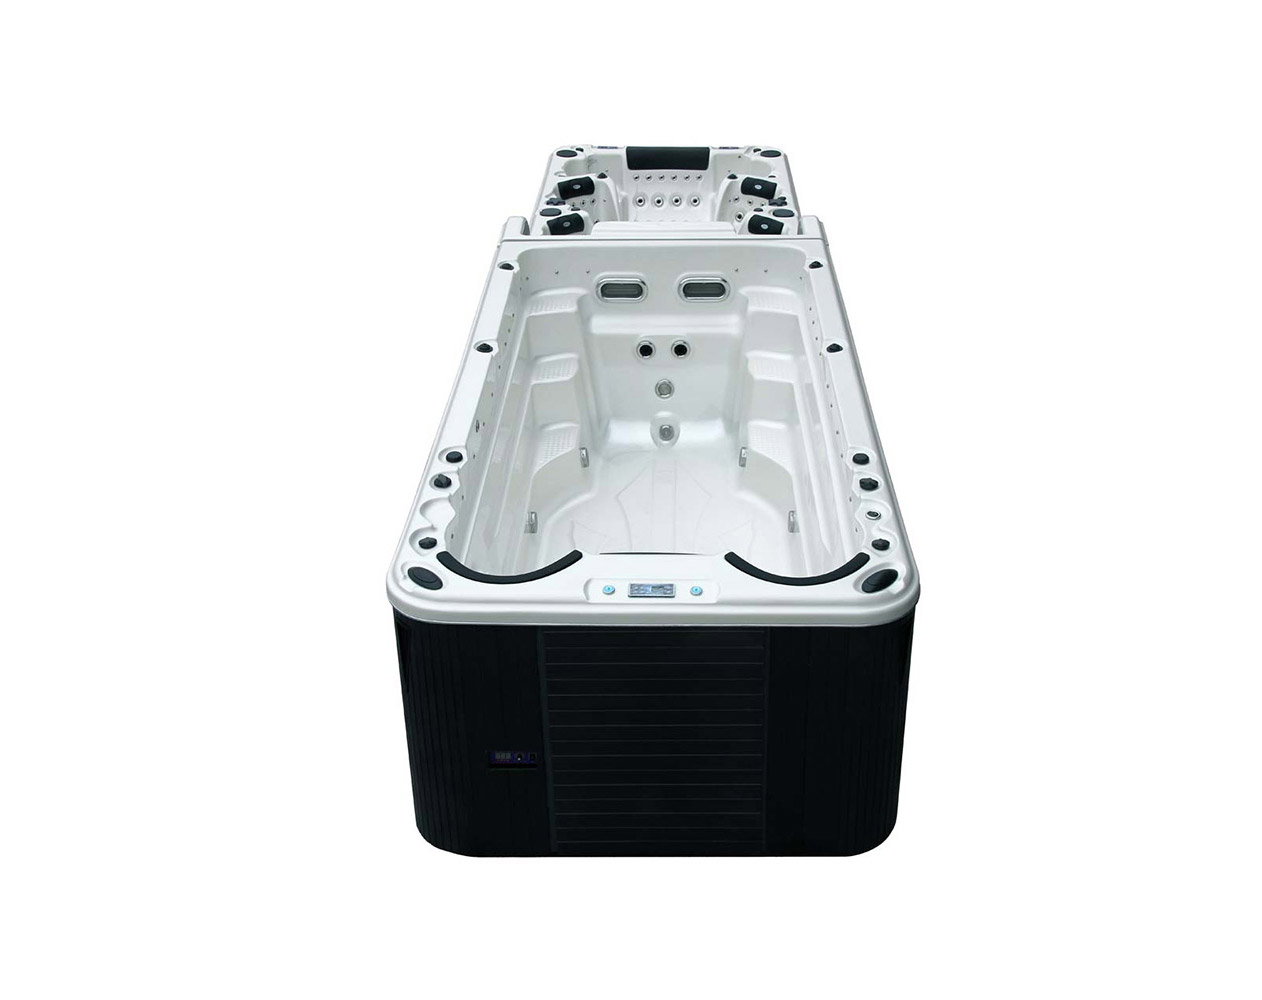 The Ultimate Hot Tub - Two level hot tub with built-in tv - Two tier spa part hot tub